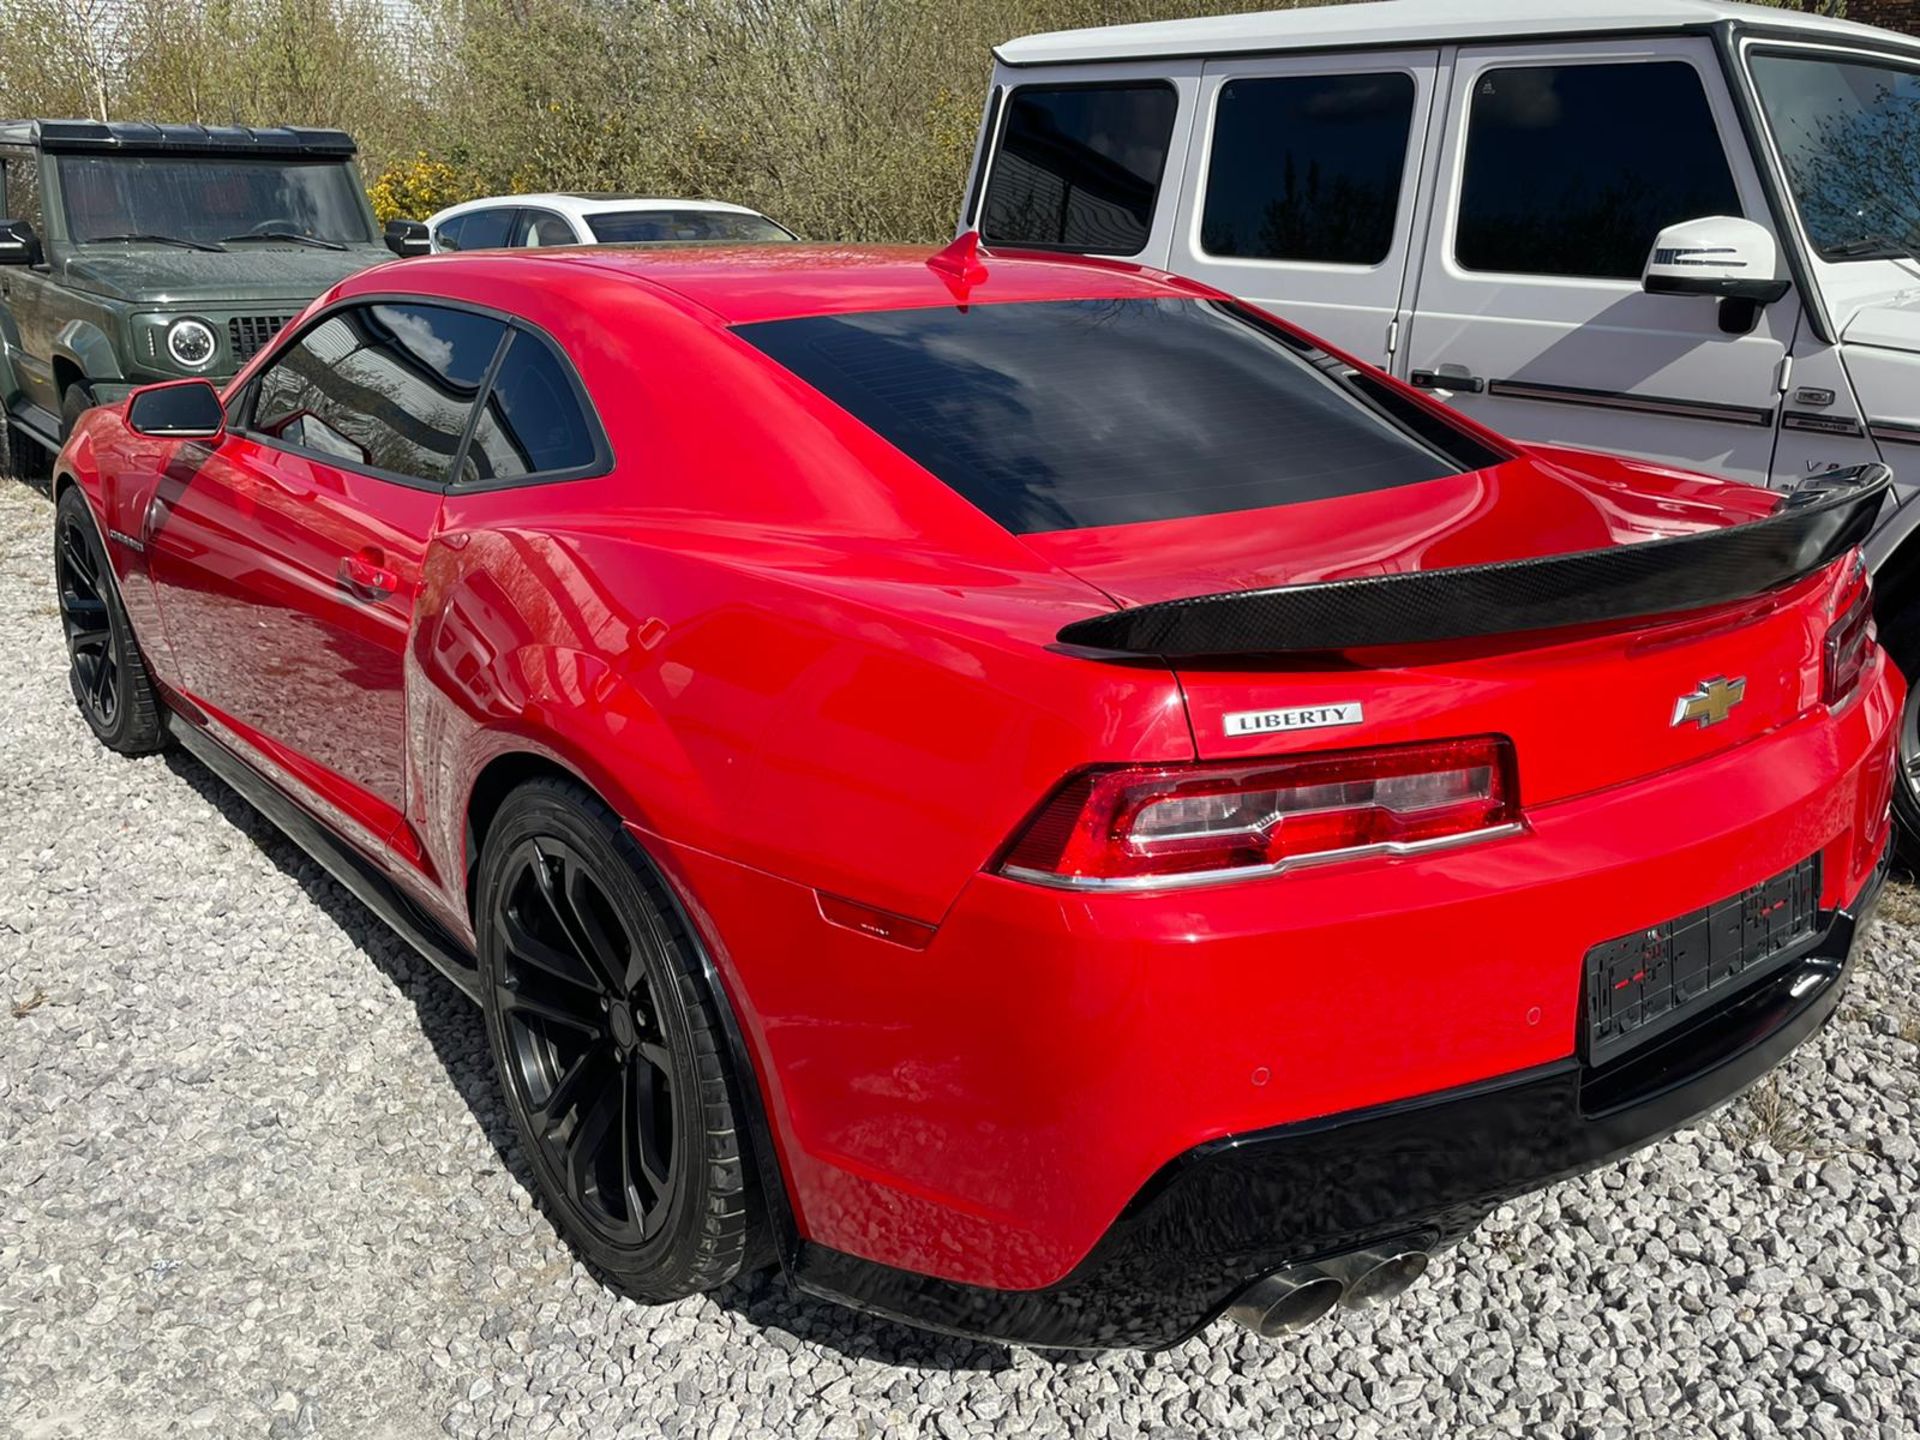 2014 CHEVROLET CAMARO ZL1 6.2 SUPERCHARGED 850 BHP 850 FT LBS TORQUE, 10 SPEED AUTO PADDLE SHIFT - Image 2 of 17